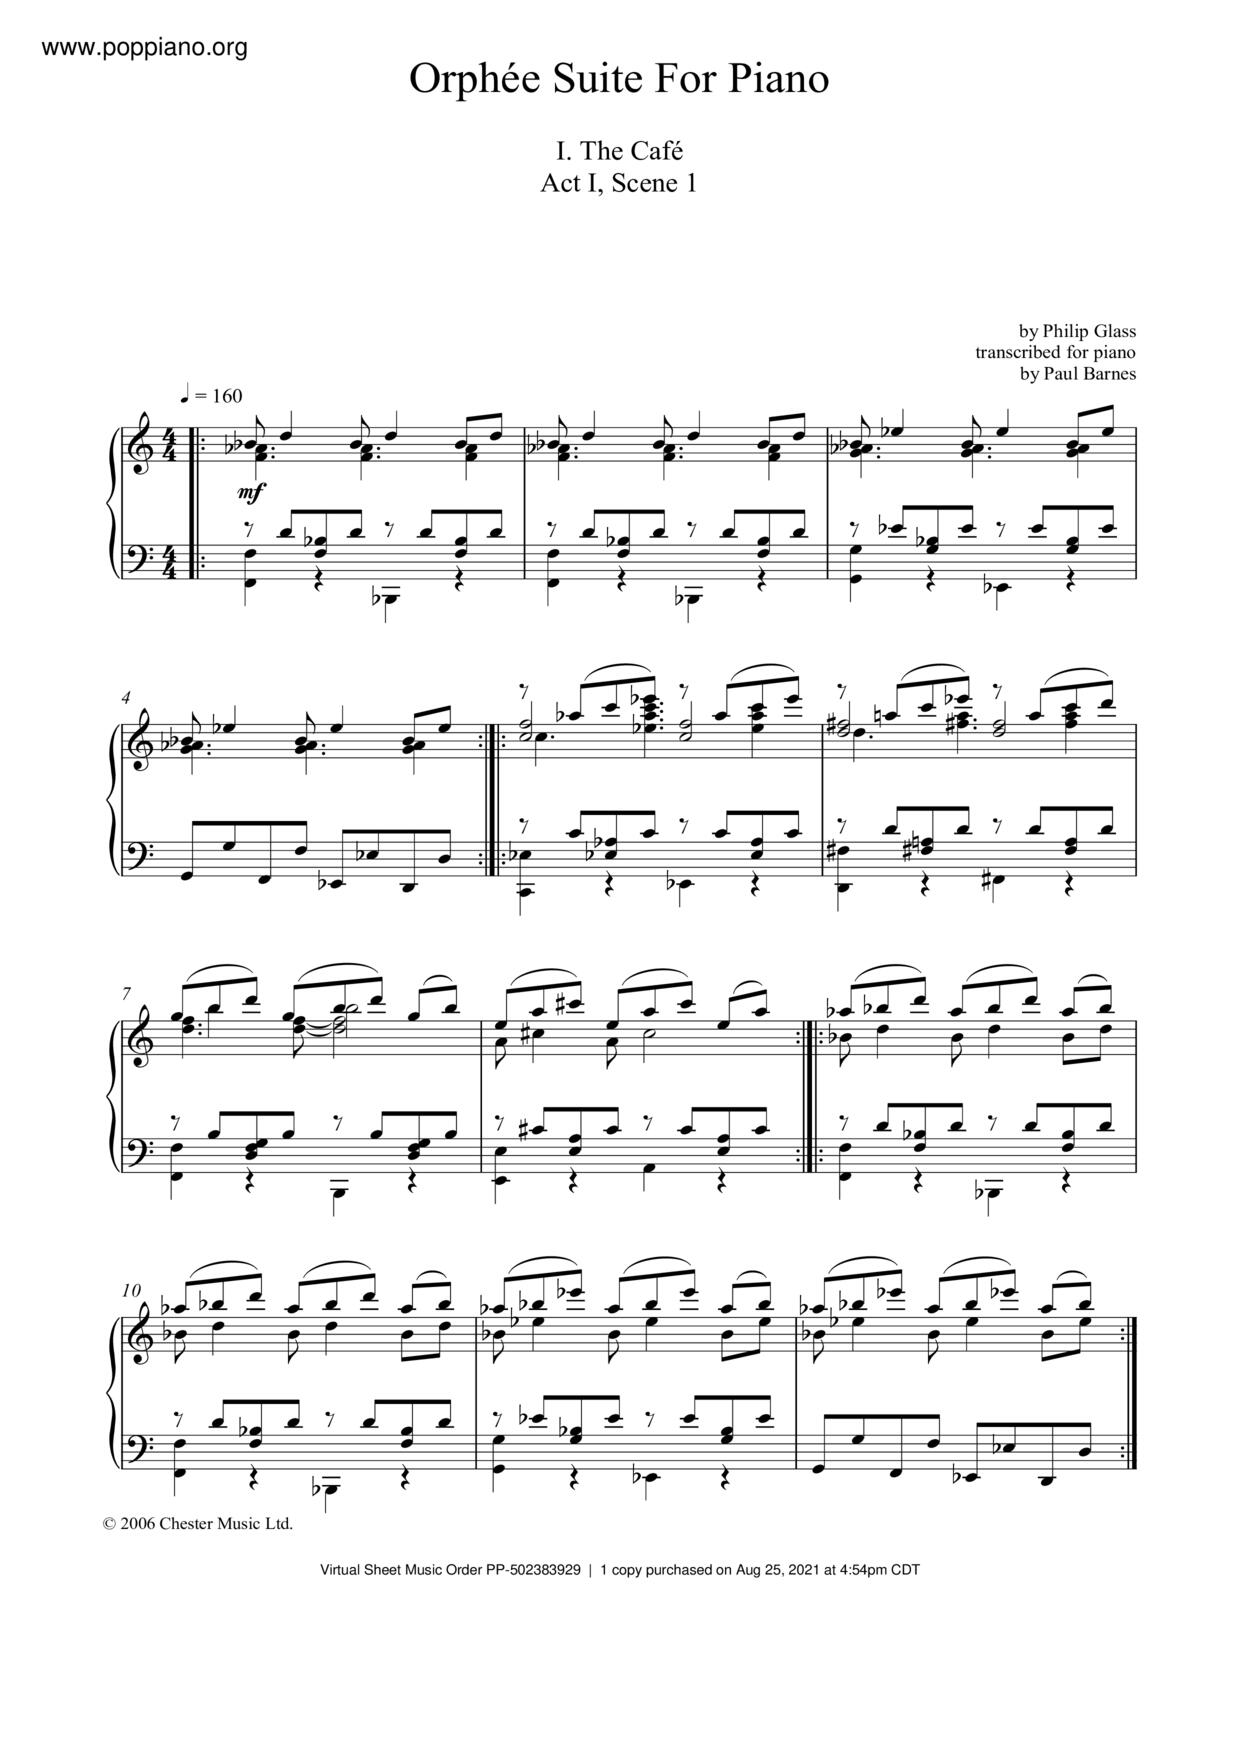 Orphee Suite For Piano, I. The Cafe, Act I, Scene 1琴谱